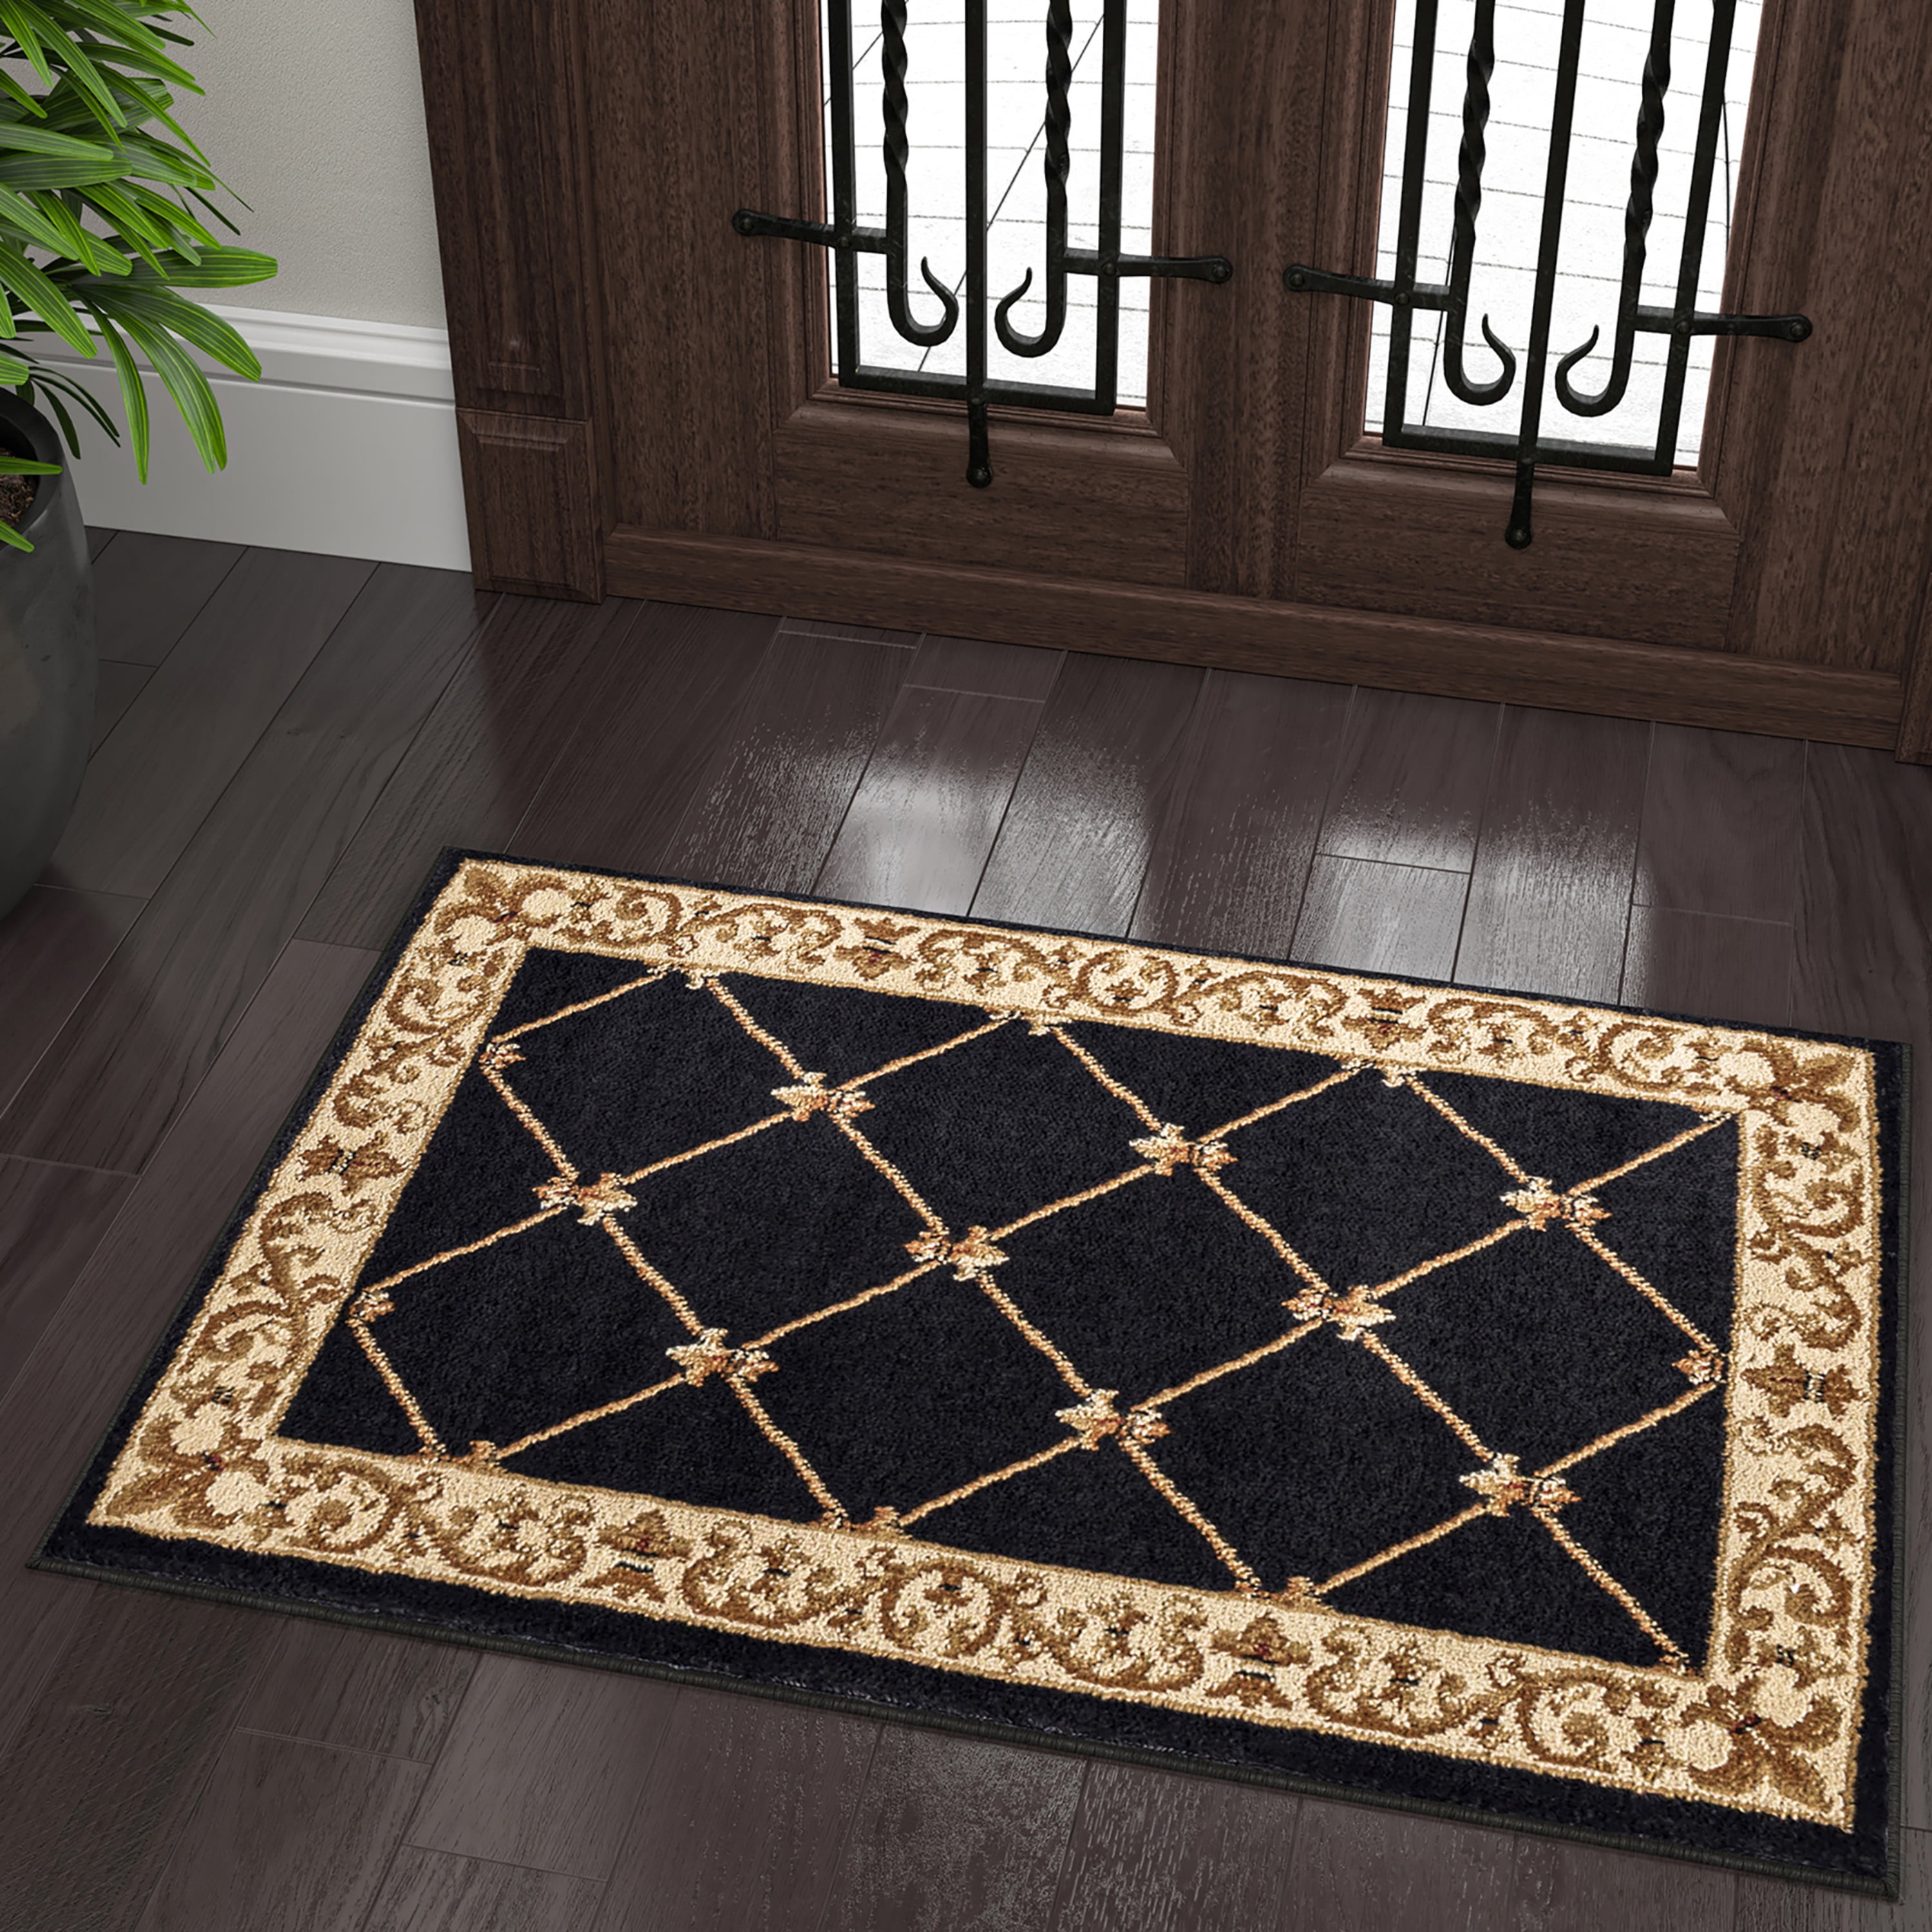 Uphome Black Bathroom Rugs, 2' x 3' Washable Reversible Entryway Rug,  Farmhouse Cotton Small Kitchen Rugs, Soft Modern Low Pile Throw Mat for  Foyer